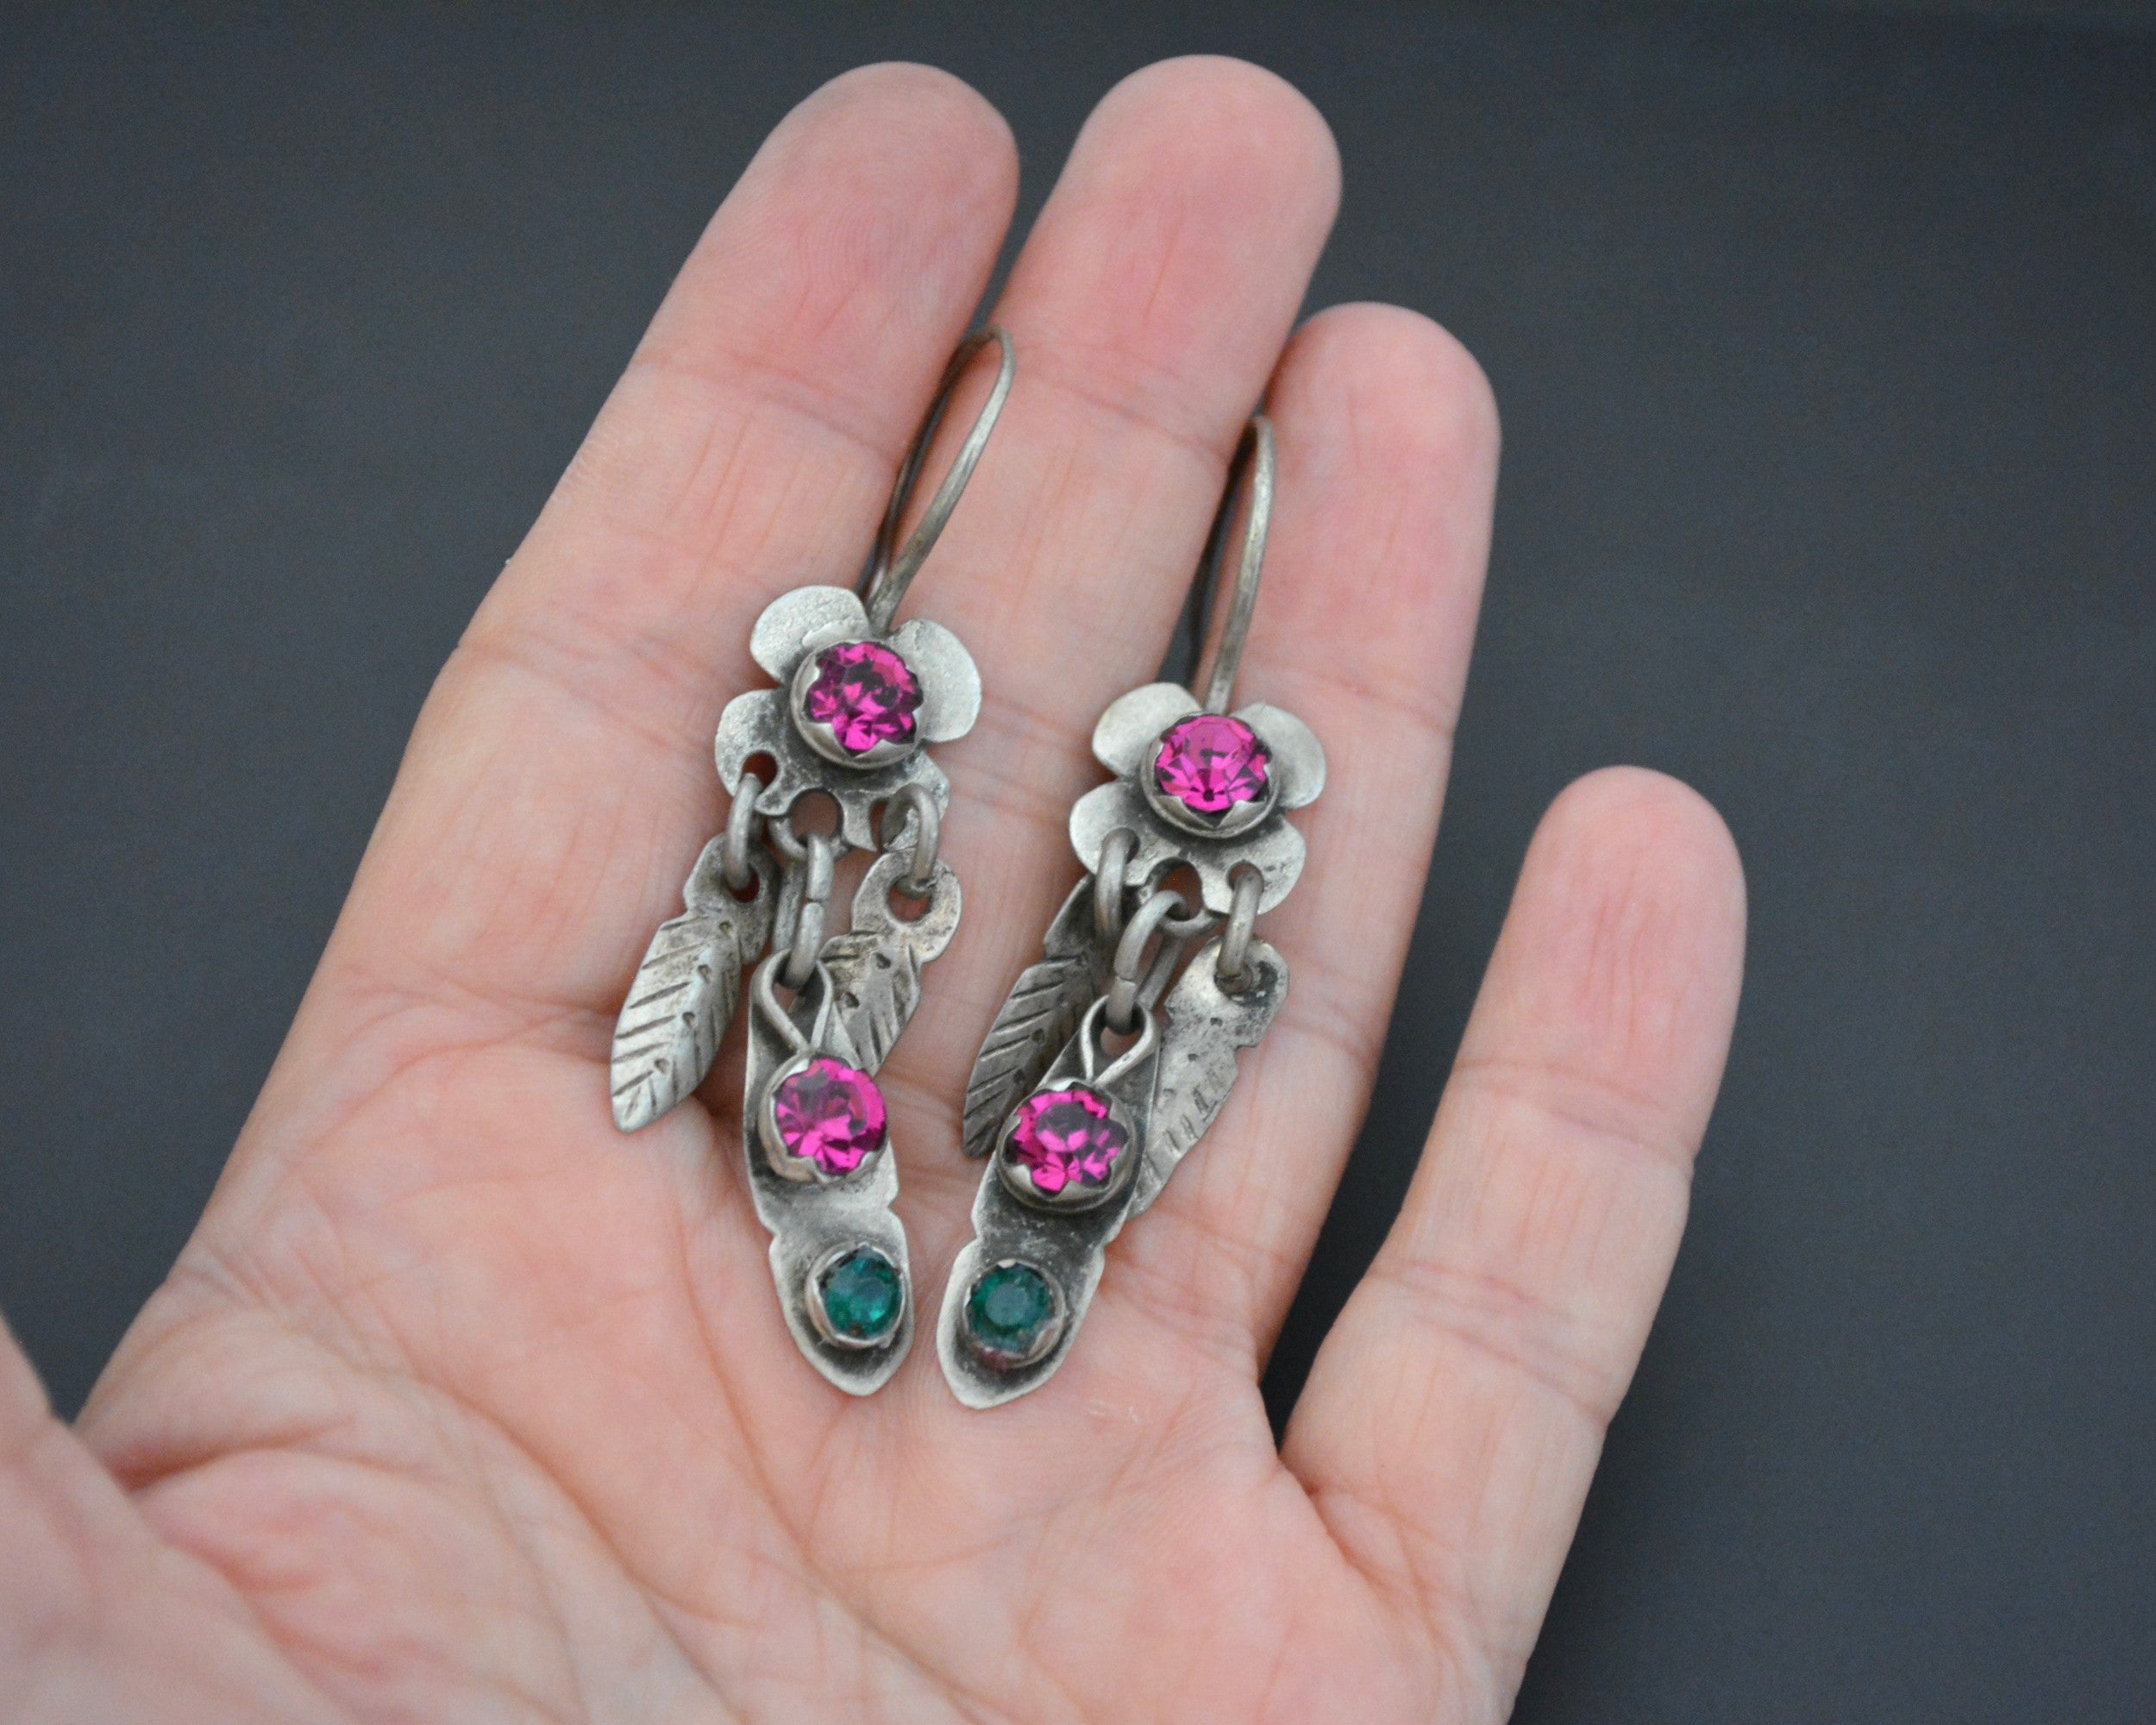 Afghani Earrings with Pink Glass Stones